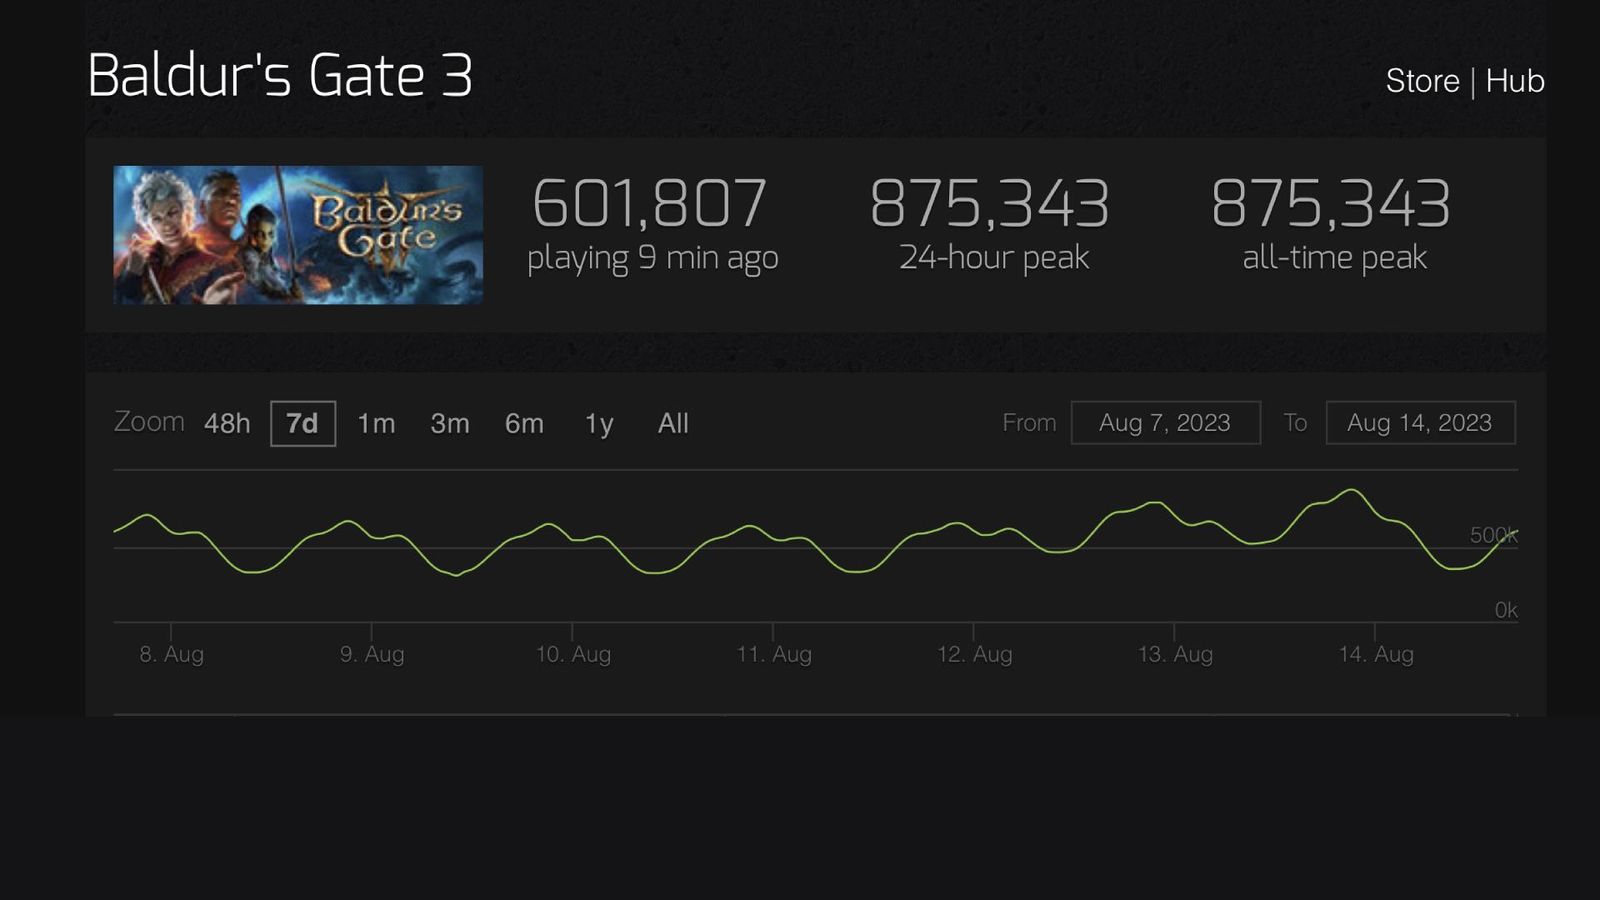 Baldur’s Gate 3 breaking records of concurrent players with a graph showing an all-time peak of 875,000 concurrents. 